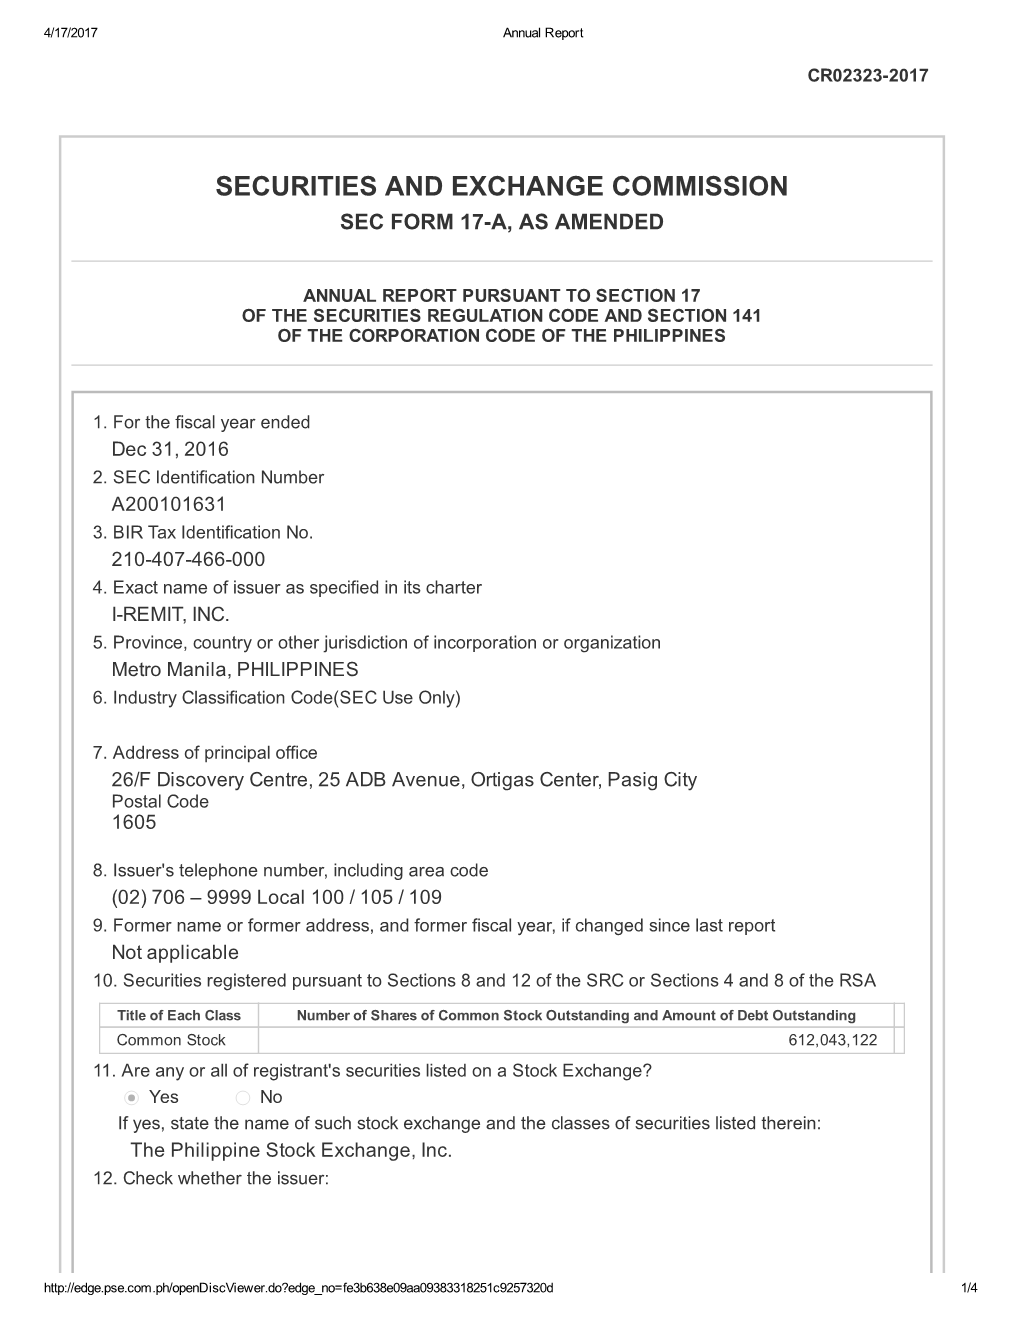 Securities and Exchange Commission Sec Form 17­A, As Amended